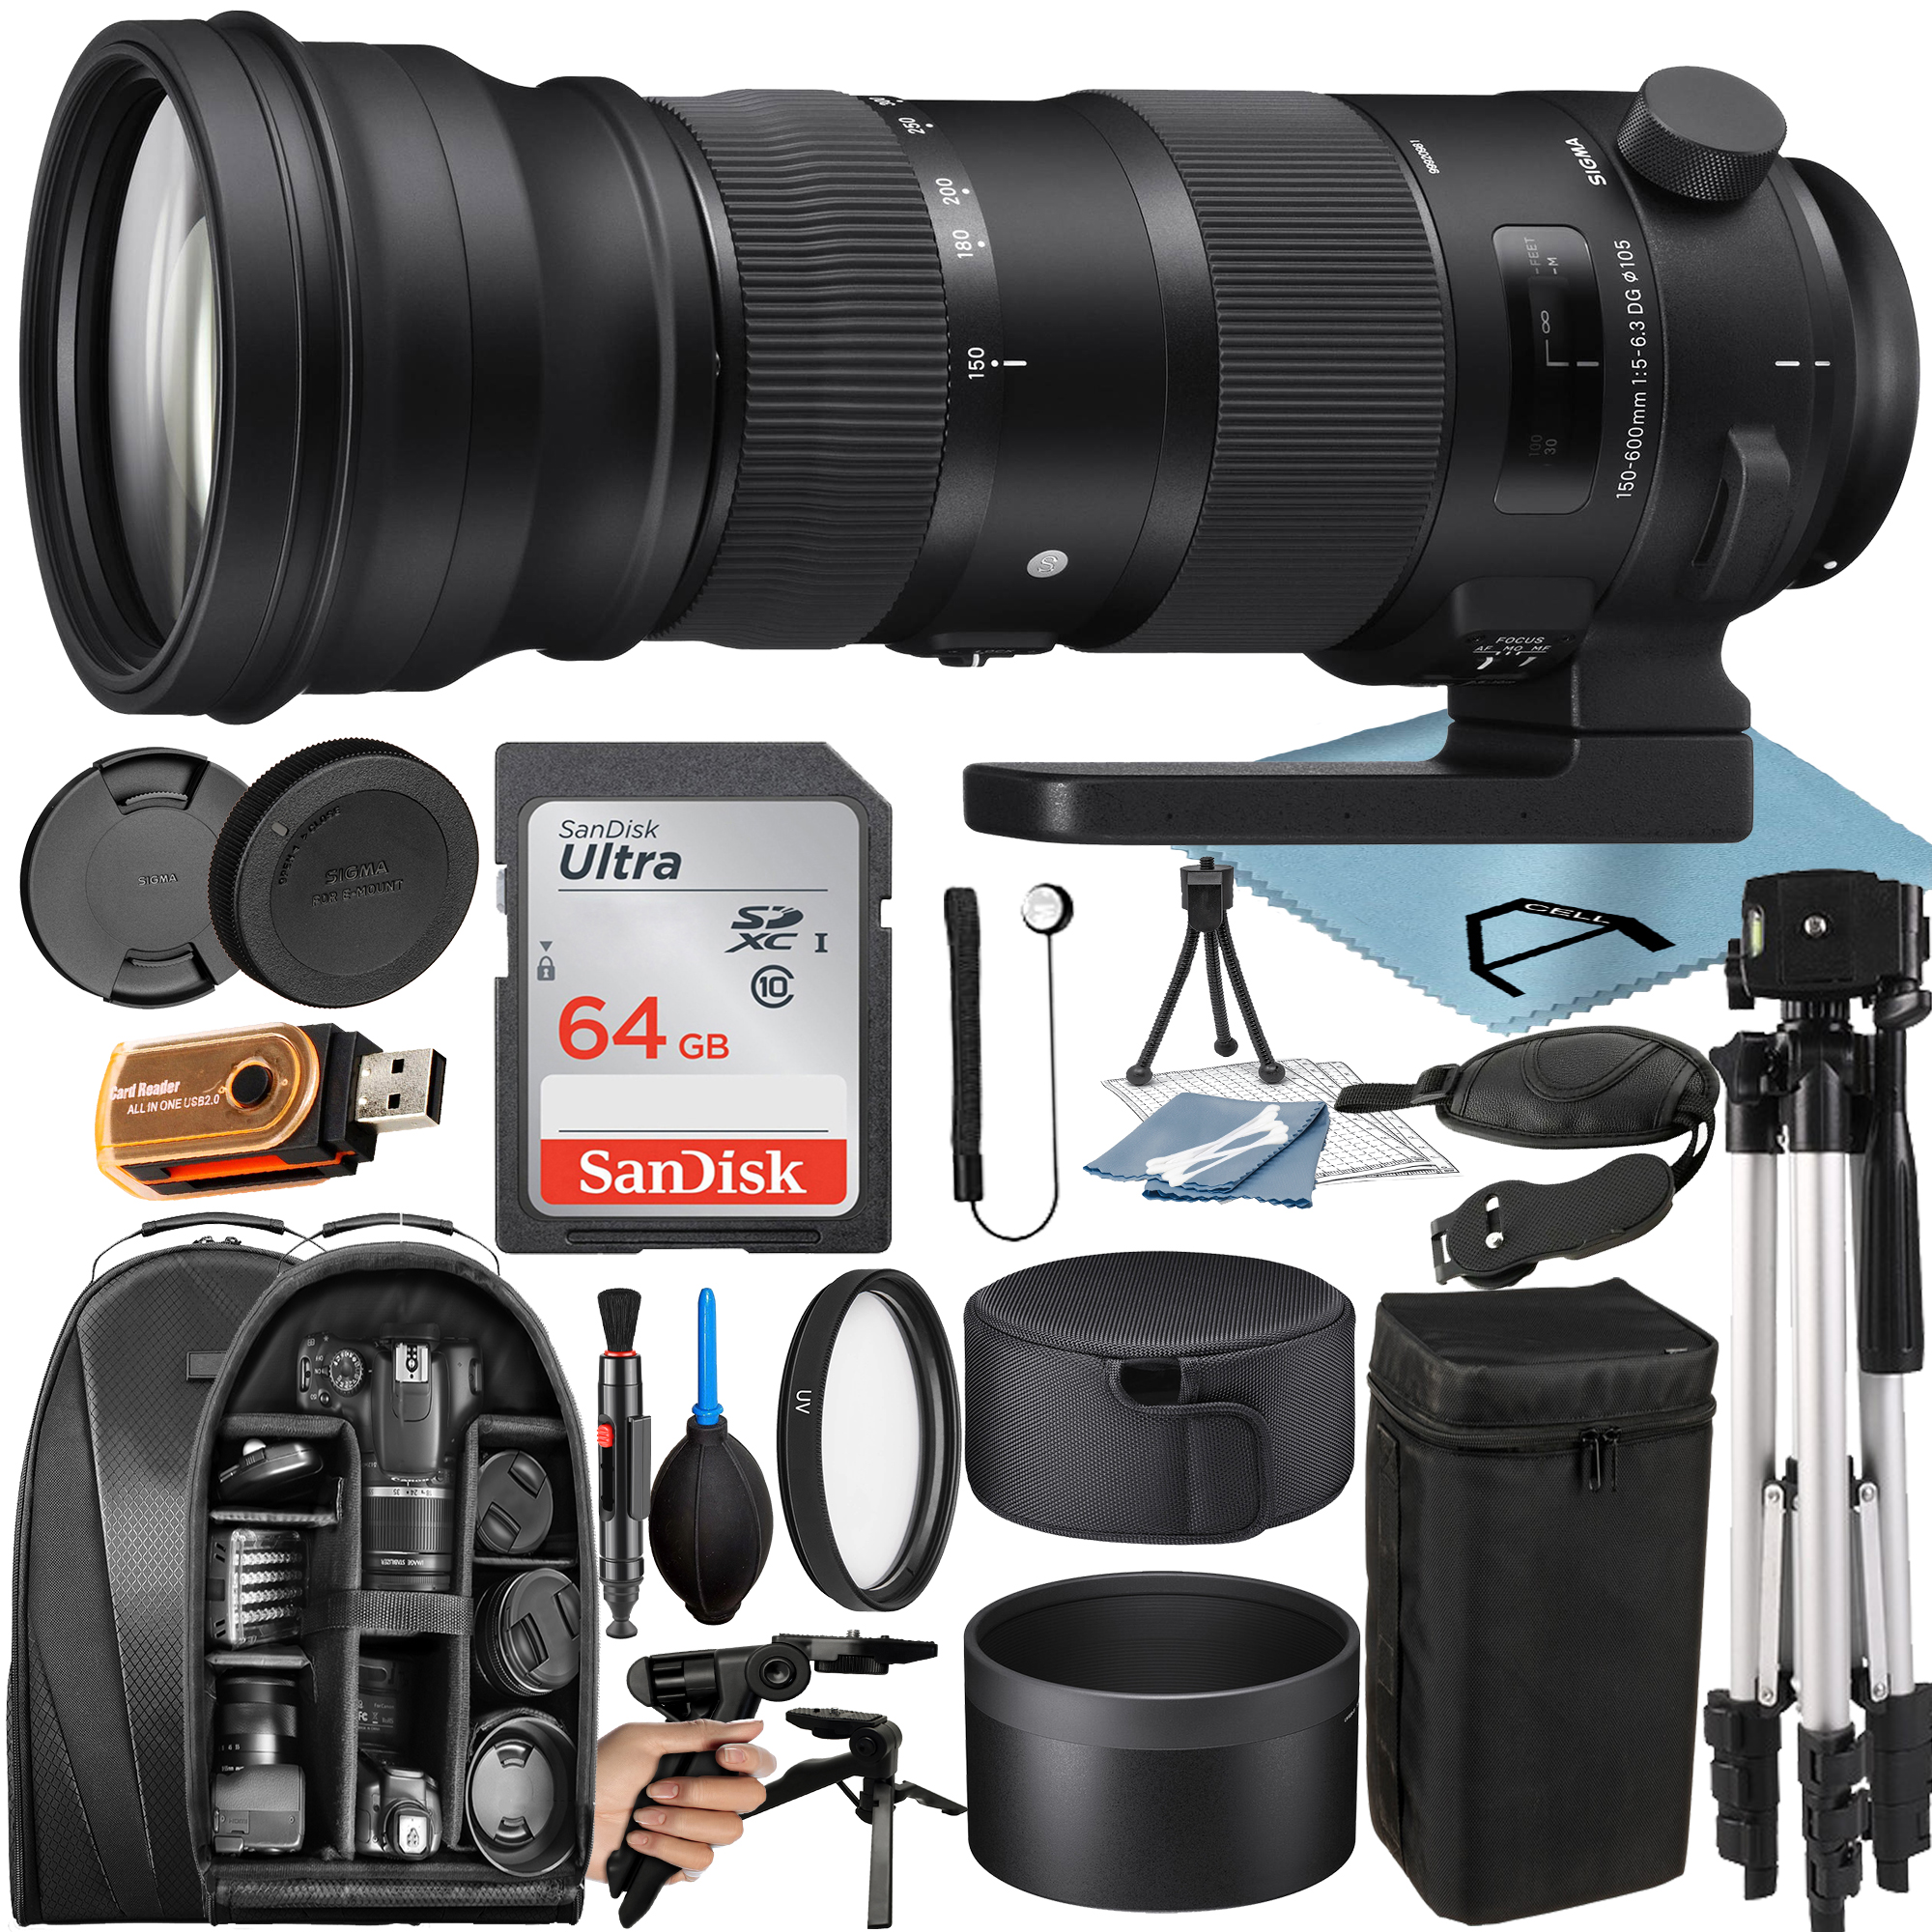 Sigma 150-600mm F/5-6.3 DG OS HSM Sports Lens for Canon EF with 64GB SanDisk Memory Card + Tripod + Backpack + A-Cell Accessory Bundle